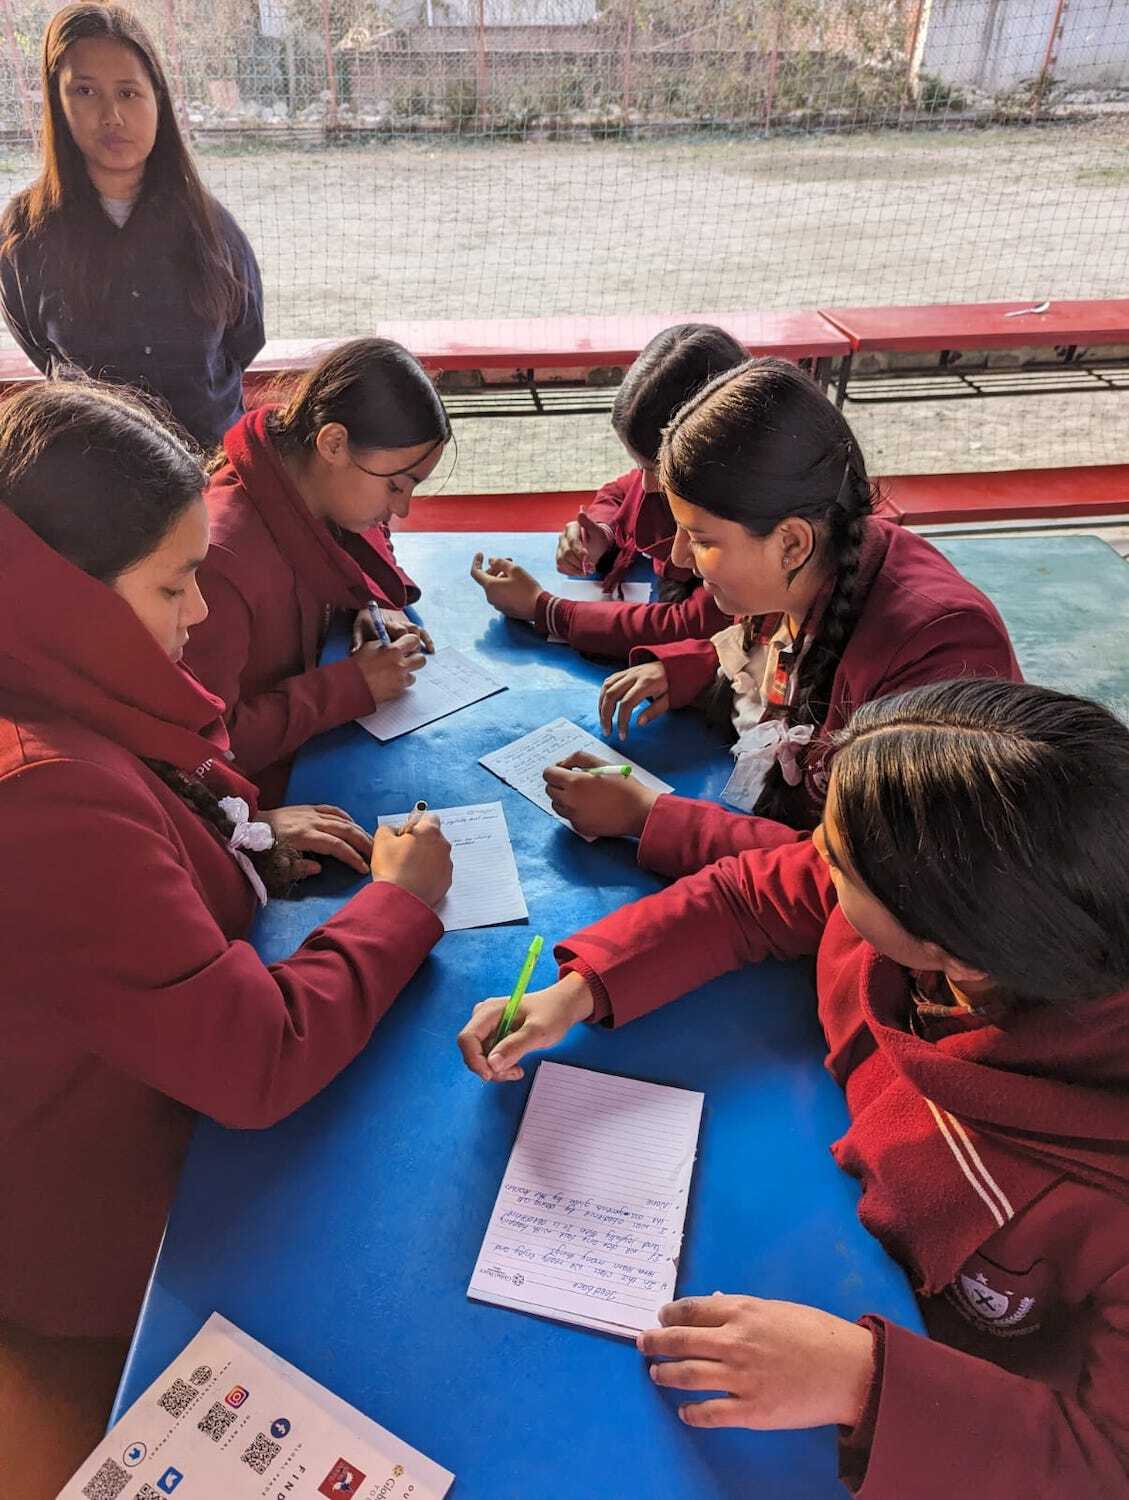 A group of students in red uniforms seated around a table, engaged in writing and discussion on values-based education, with one person standing in the background observing.